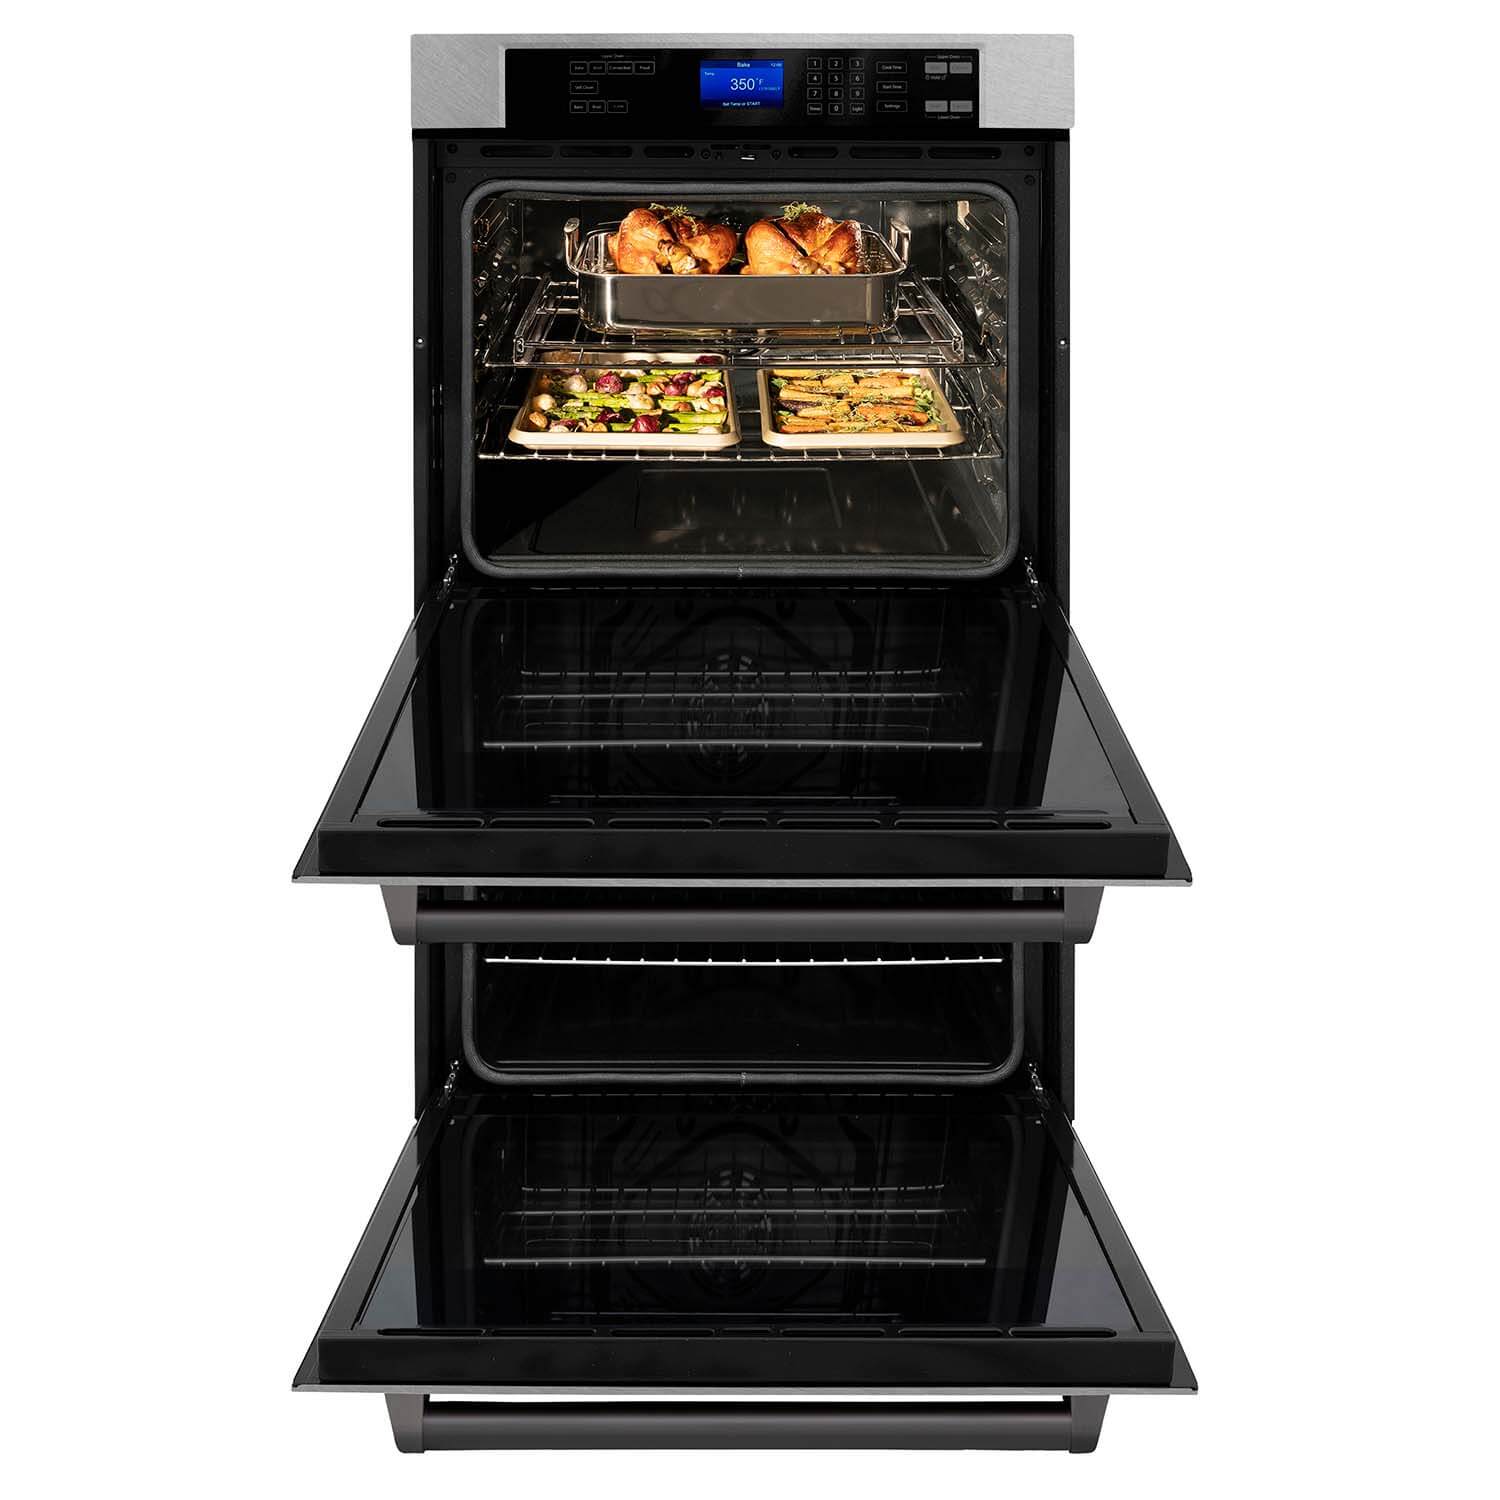 ZLINE Autograph Edition 30 in. Electric Double Wall Oven with Self Clean and True Convection in DuraSnow Stainless Steel and Matte Black Accents (AWDSZ-30-MB) front, oven open.